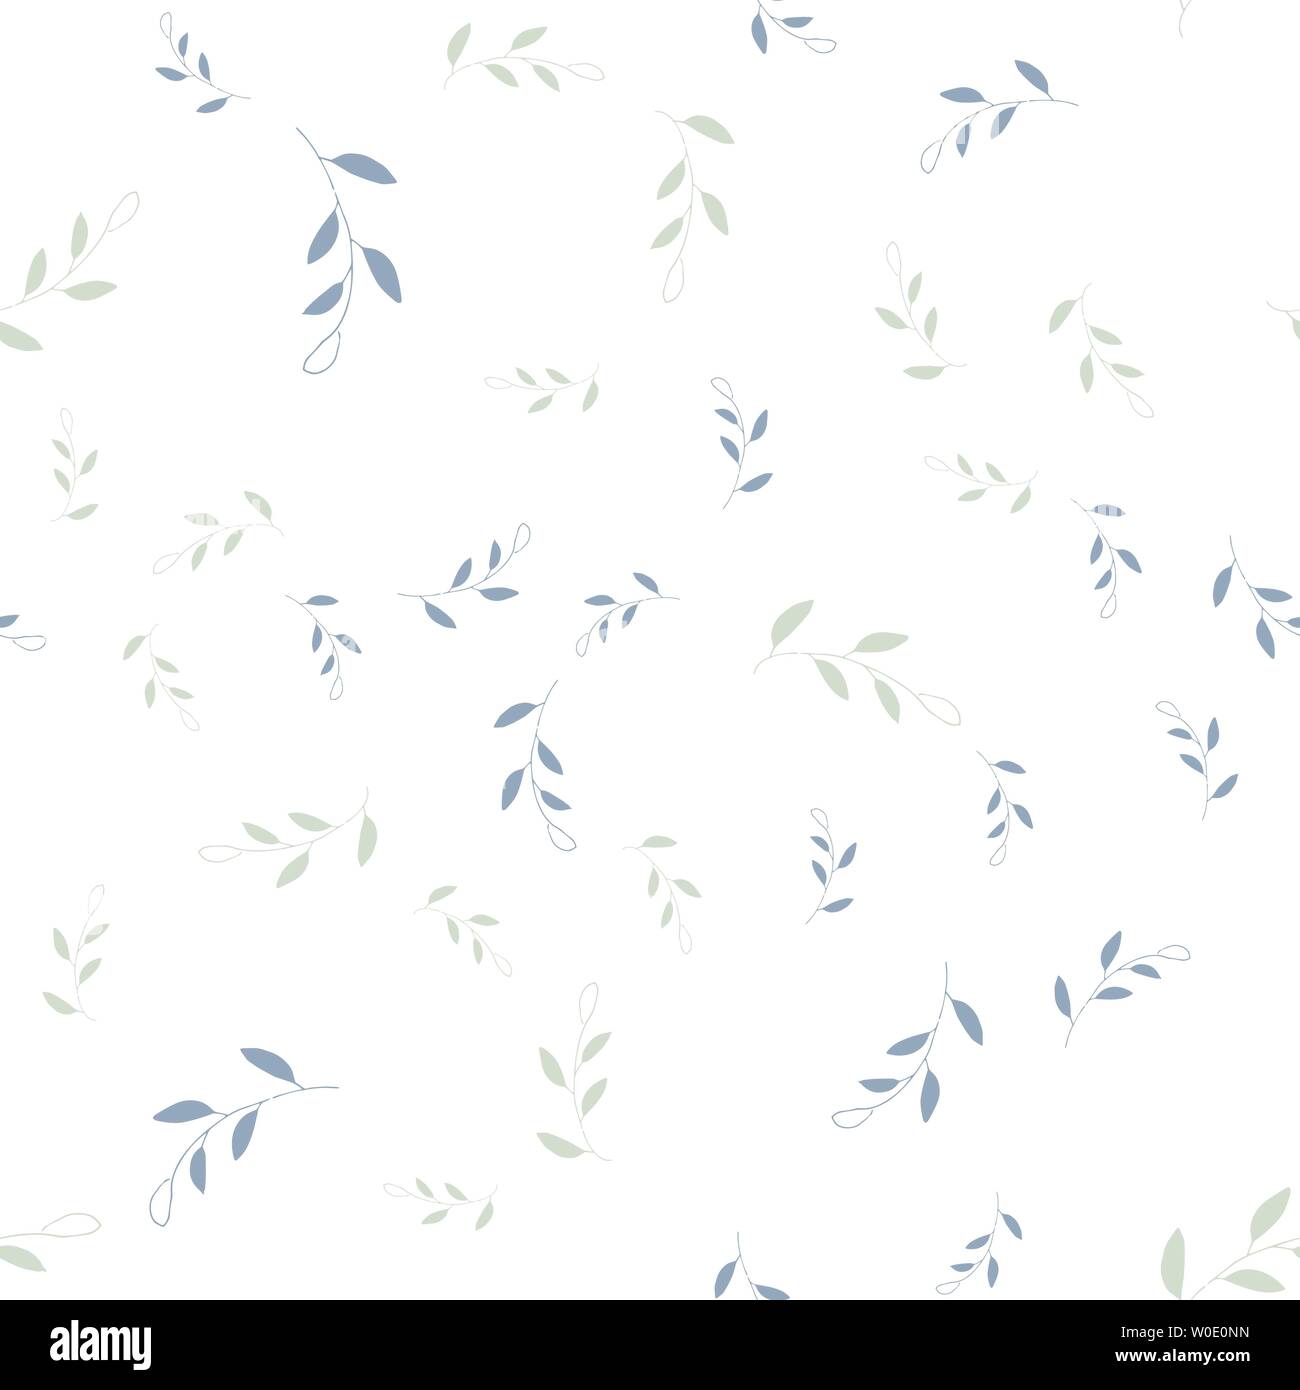 Seamless pattern of abstract branches and flowers on a white background. hand drawn vector illustration Stock Vector